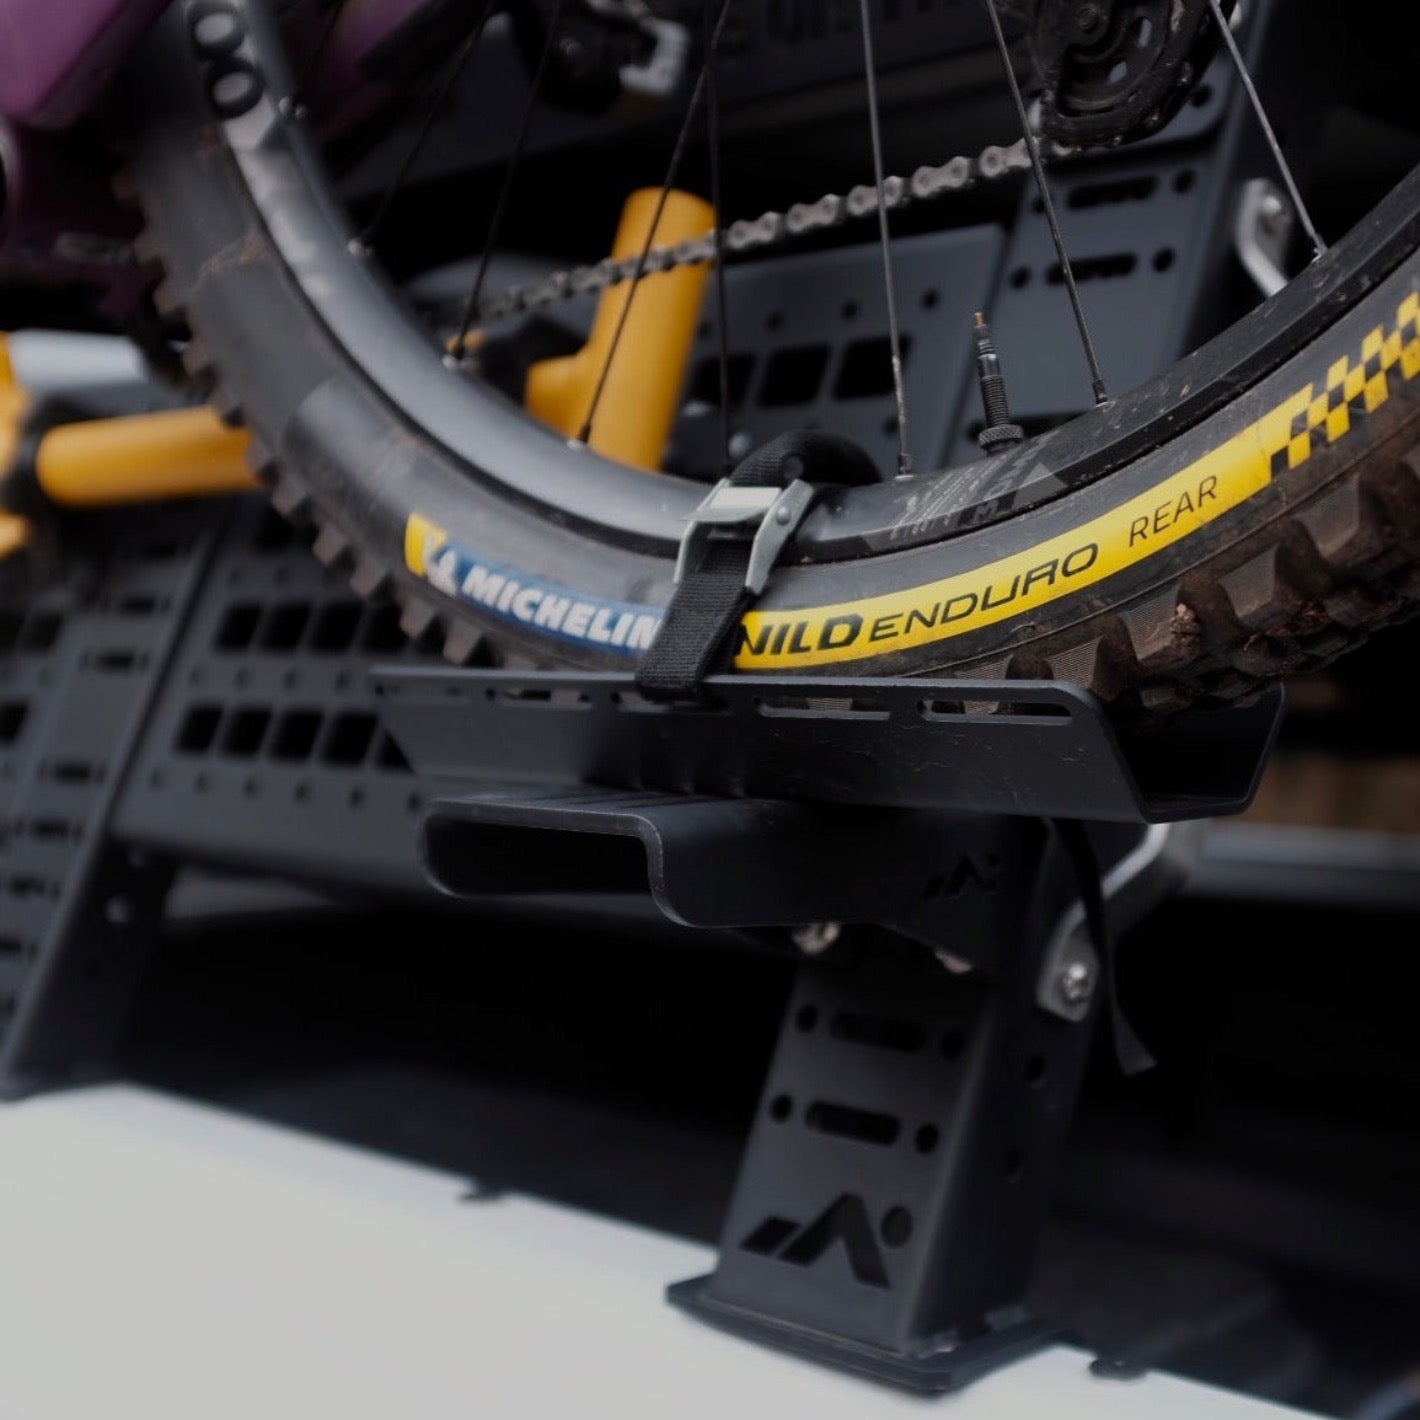 Assembled bike with Michelin tire on DOT bicycle mount and bedrack